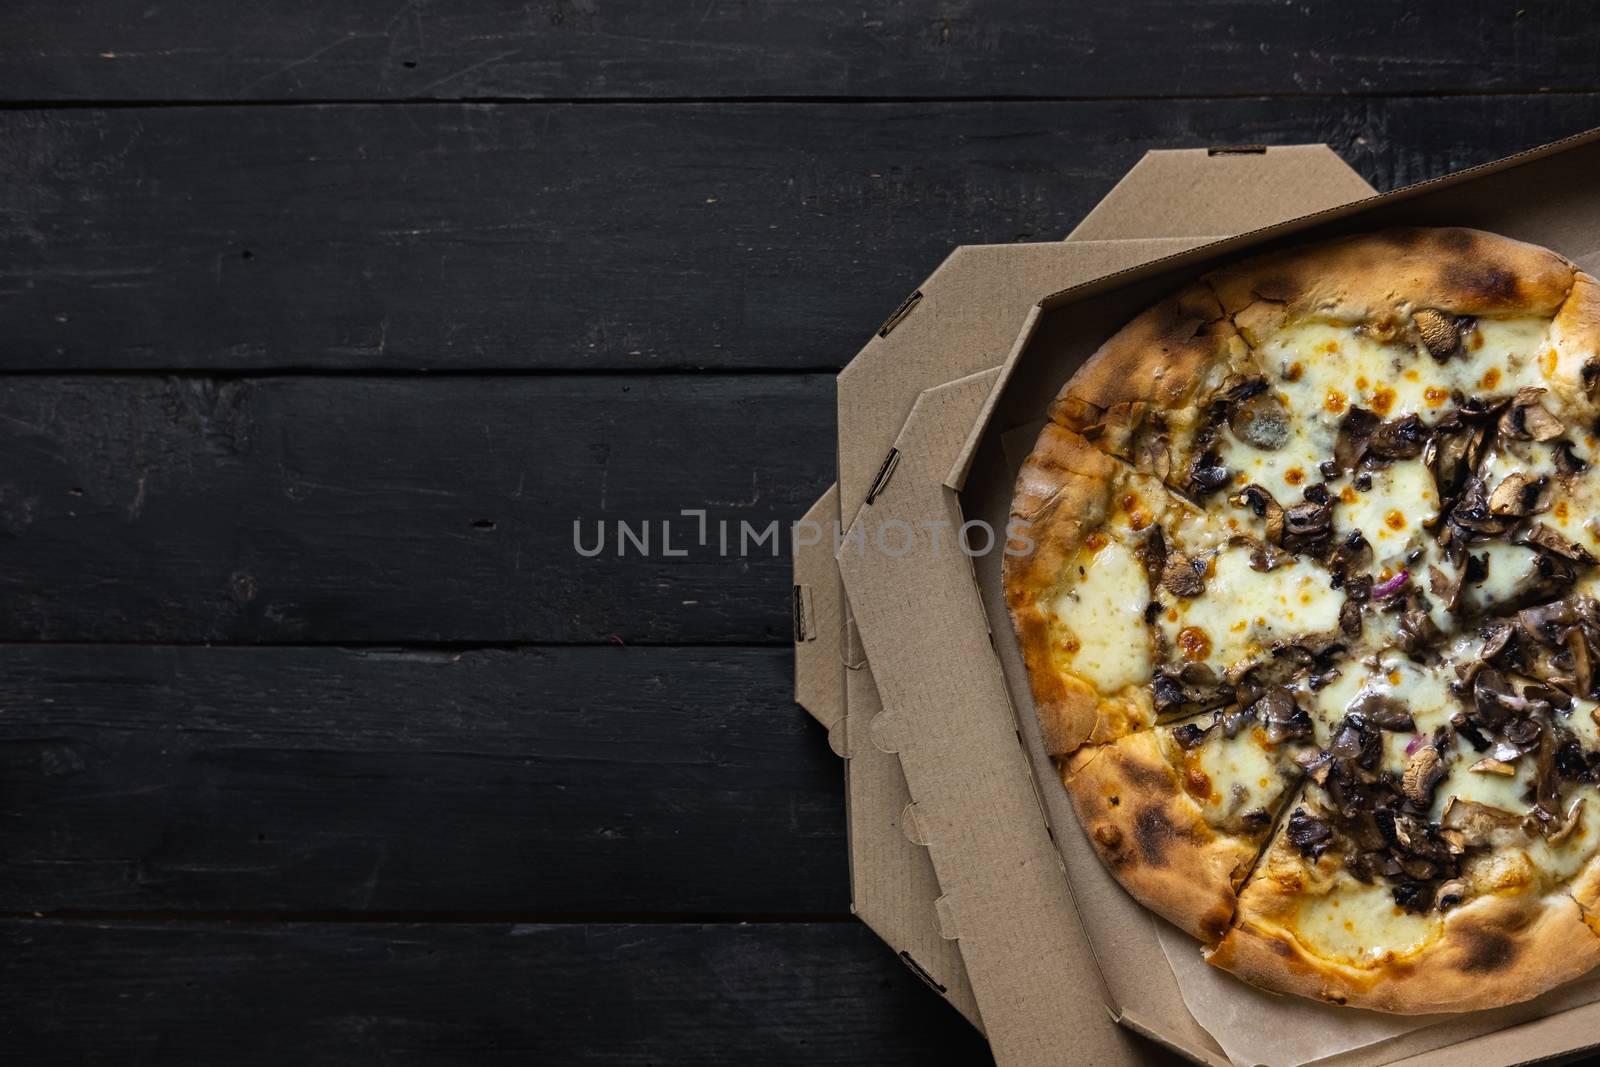 Pizza funghi in an open delivery box, dark backdrop. by photoboyko